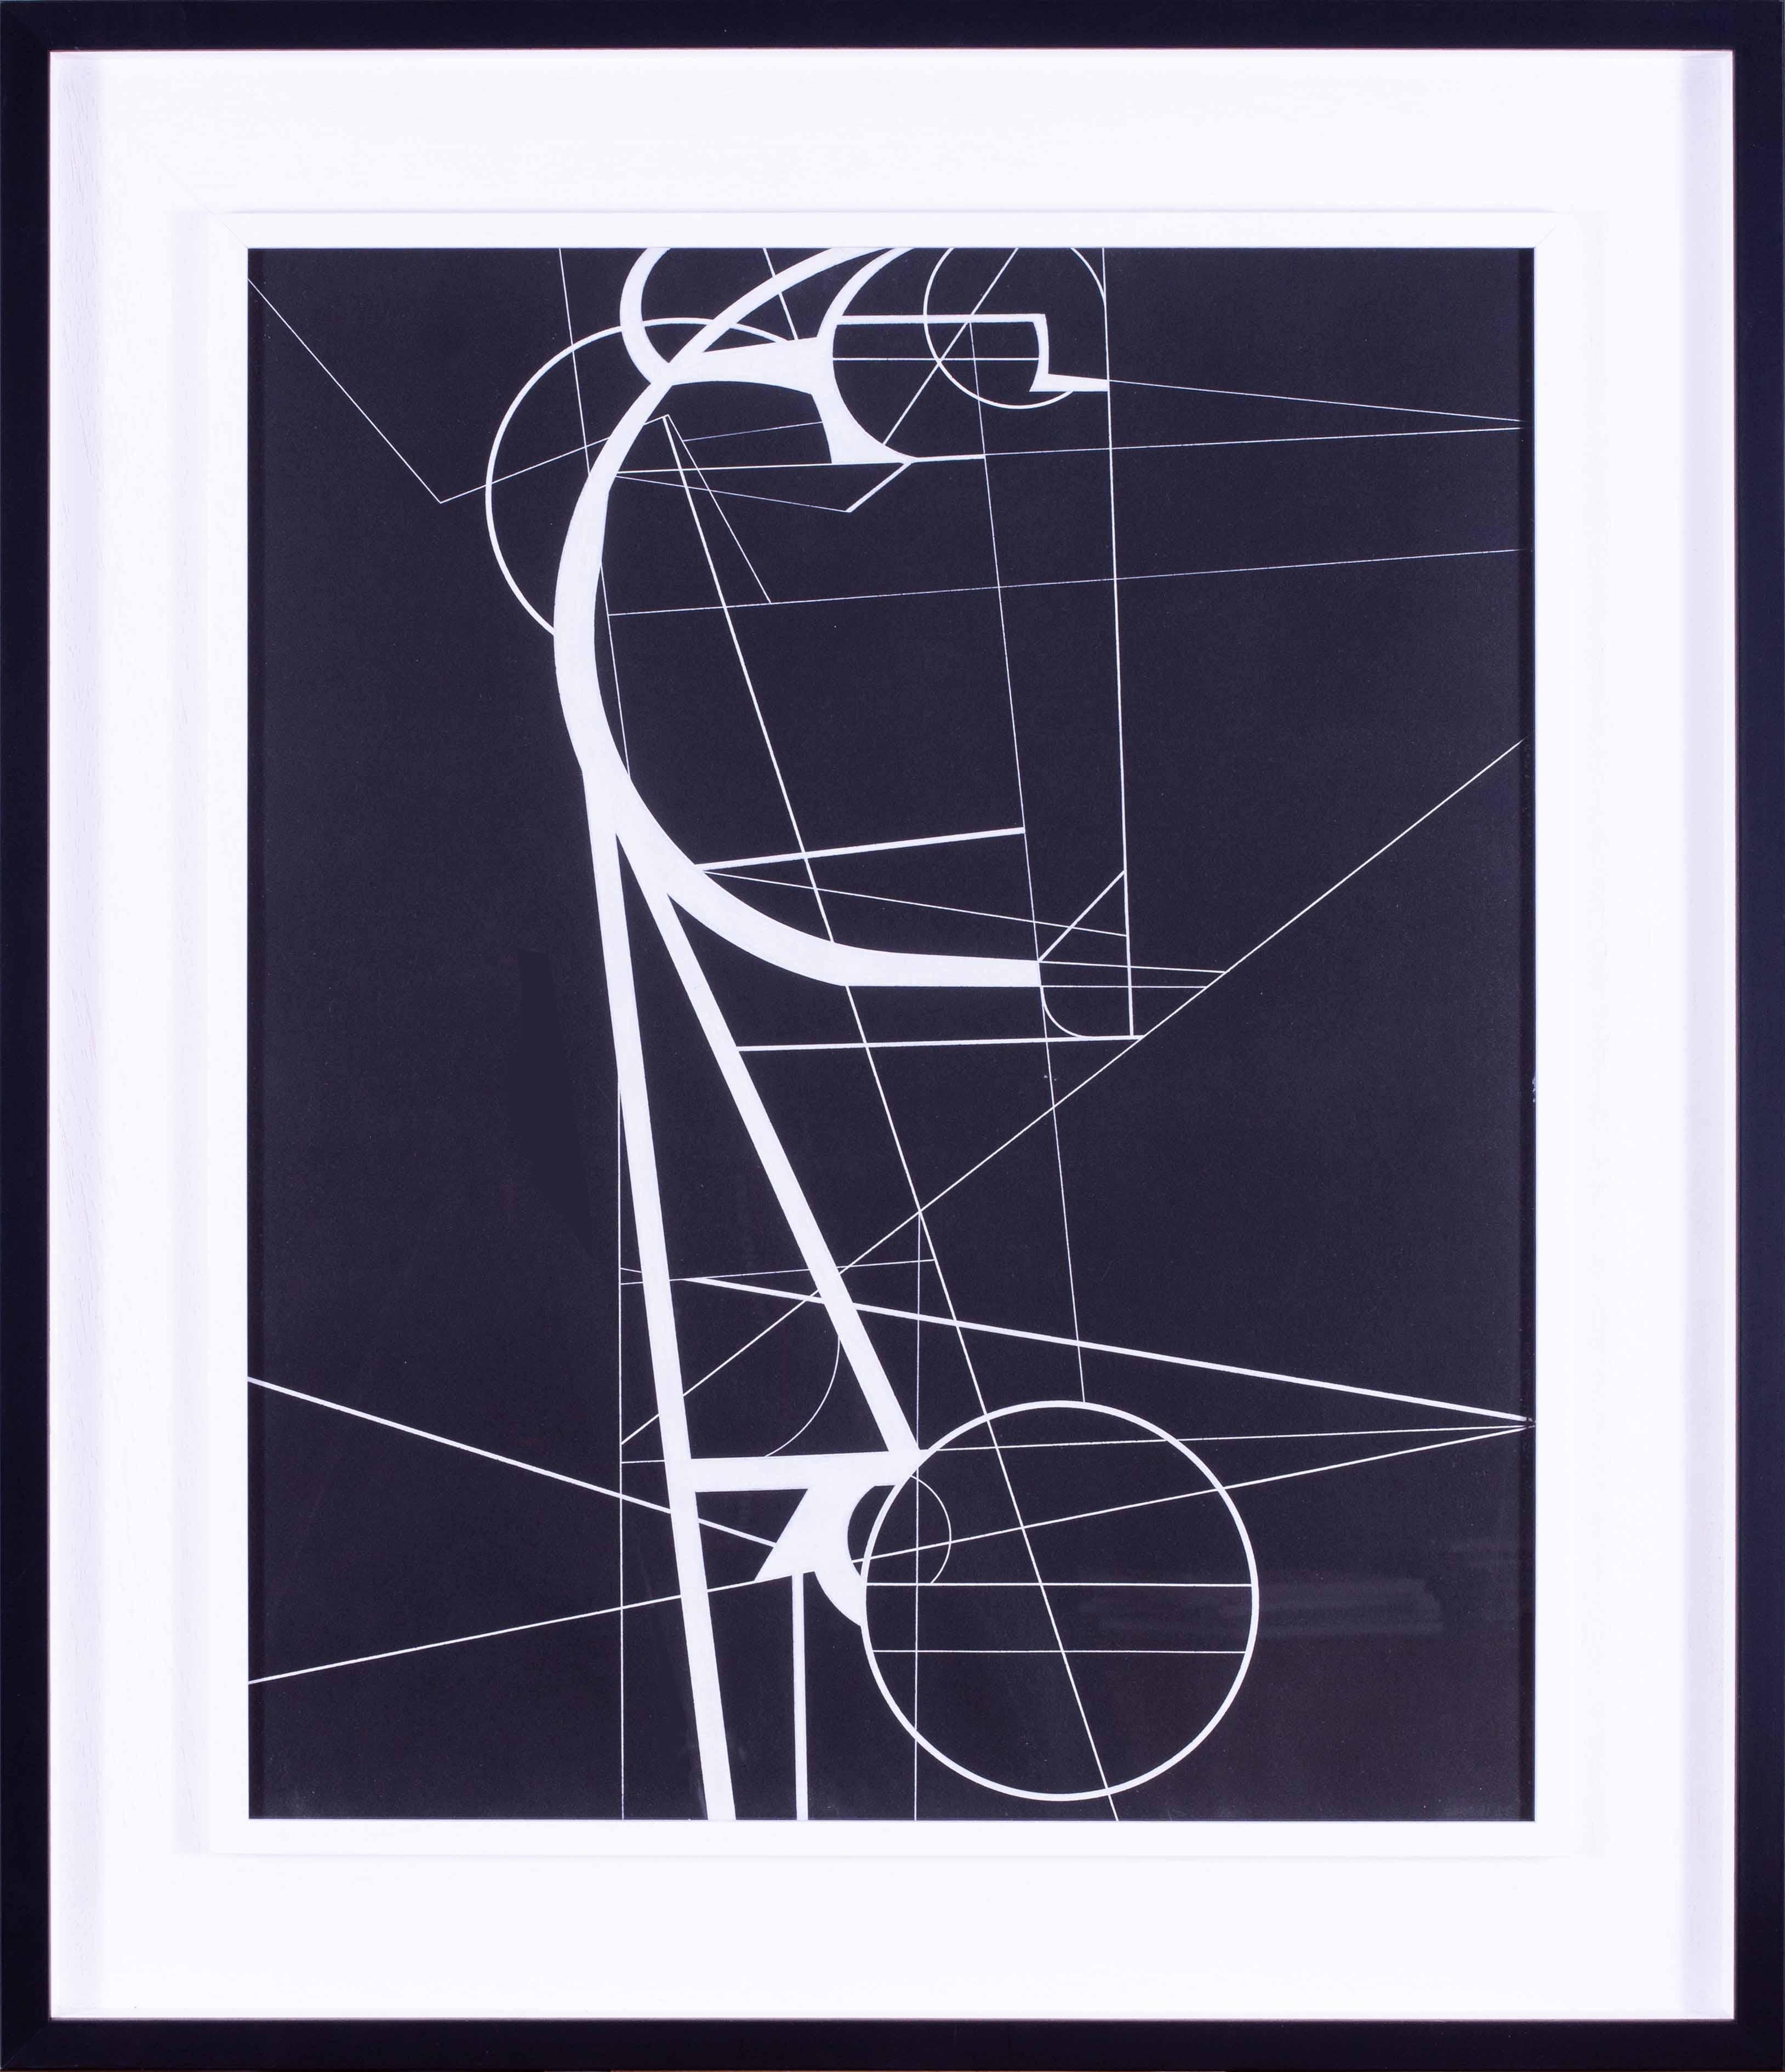 Norman Edgar Hubert (British, 1906 – 1985)
Geometric abstract in black and white
Signed and dated ‘E Hubert 55’ (on the reverse)
Gouache on black paper
25.3/8 x 20.3/4 in. (64.3 x 53 cm.)

Abstract painter, born Norman Edgar Hubert in Billingshurst,